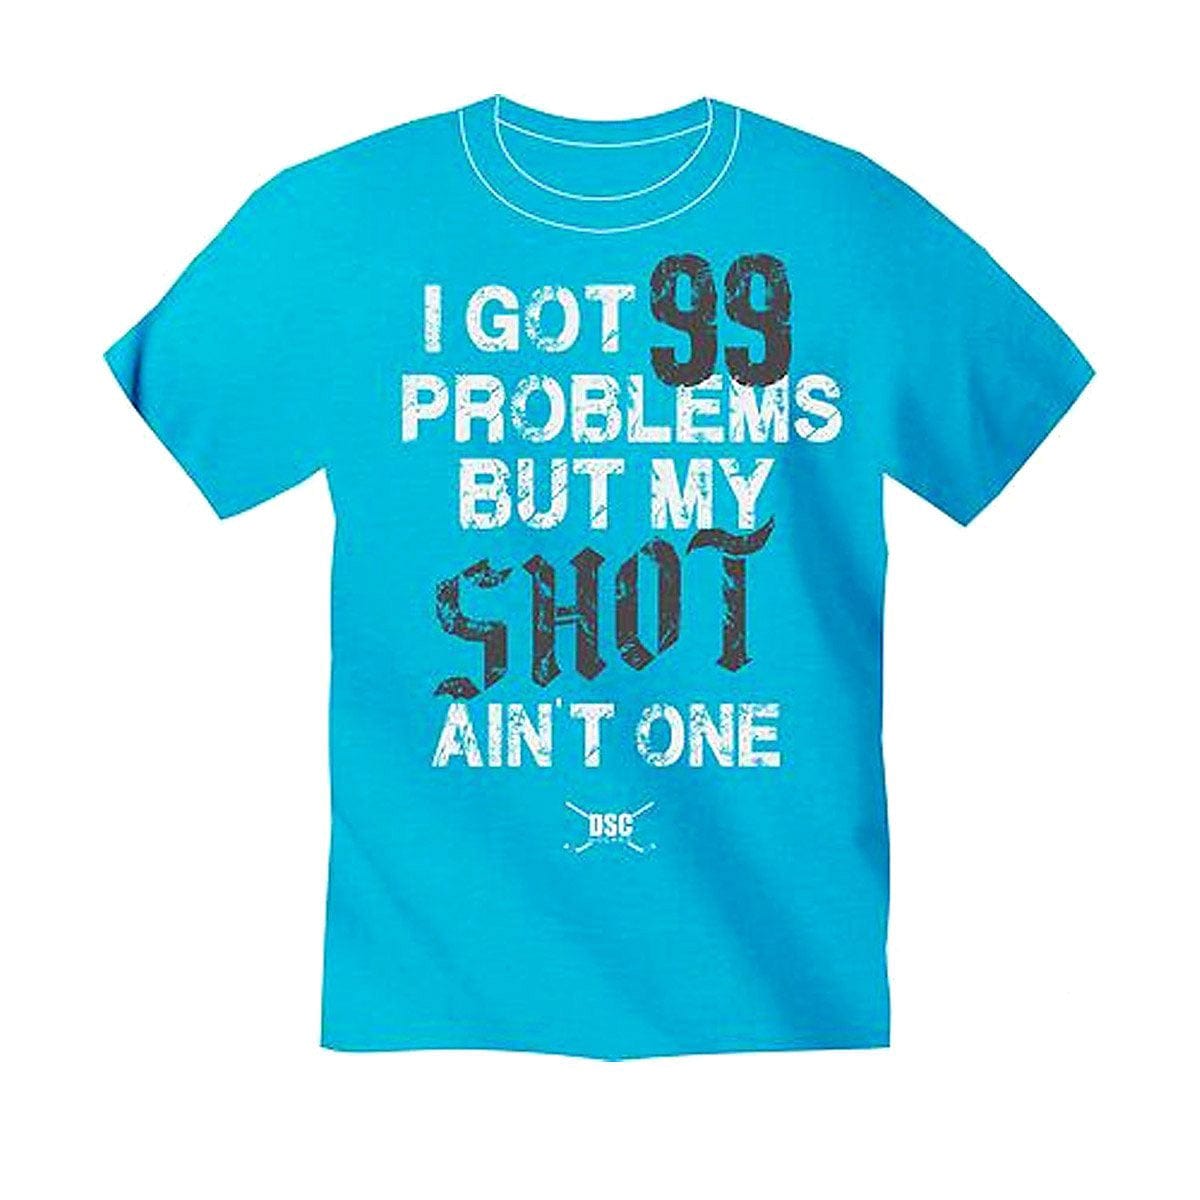 DSC Hockey 99 Problems Youth Shirt - The Hockey Shop Source For Sports